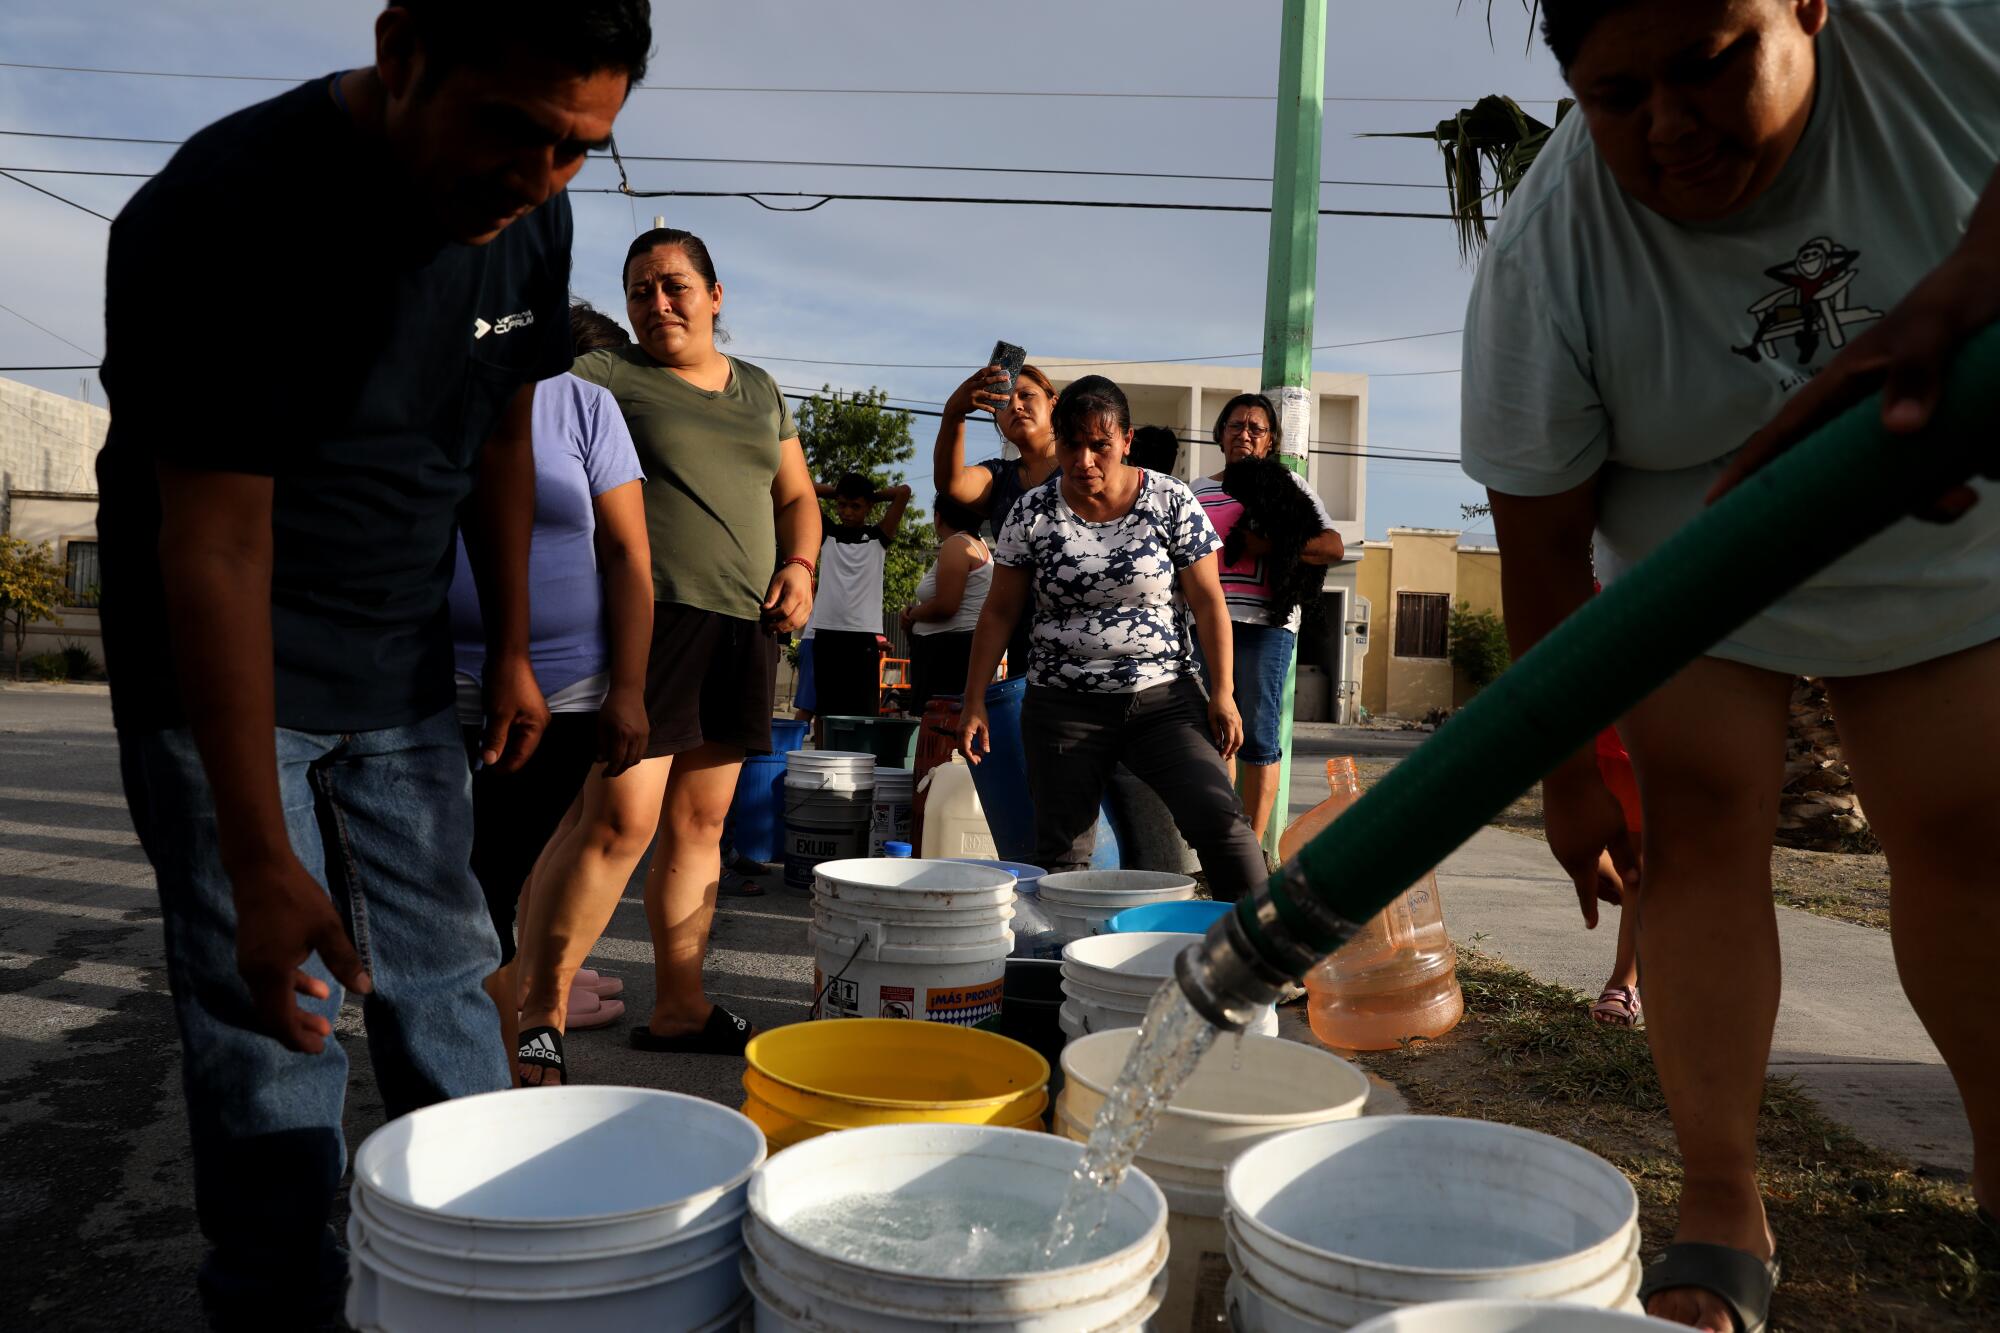 Water from a hose fills a bucket as people wait in line